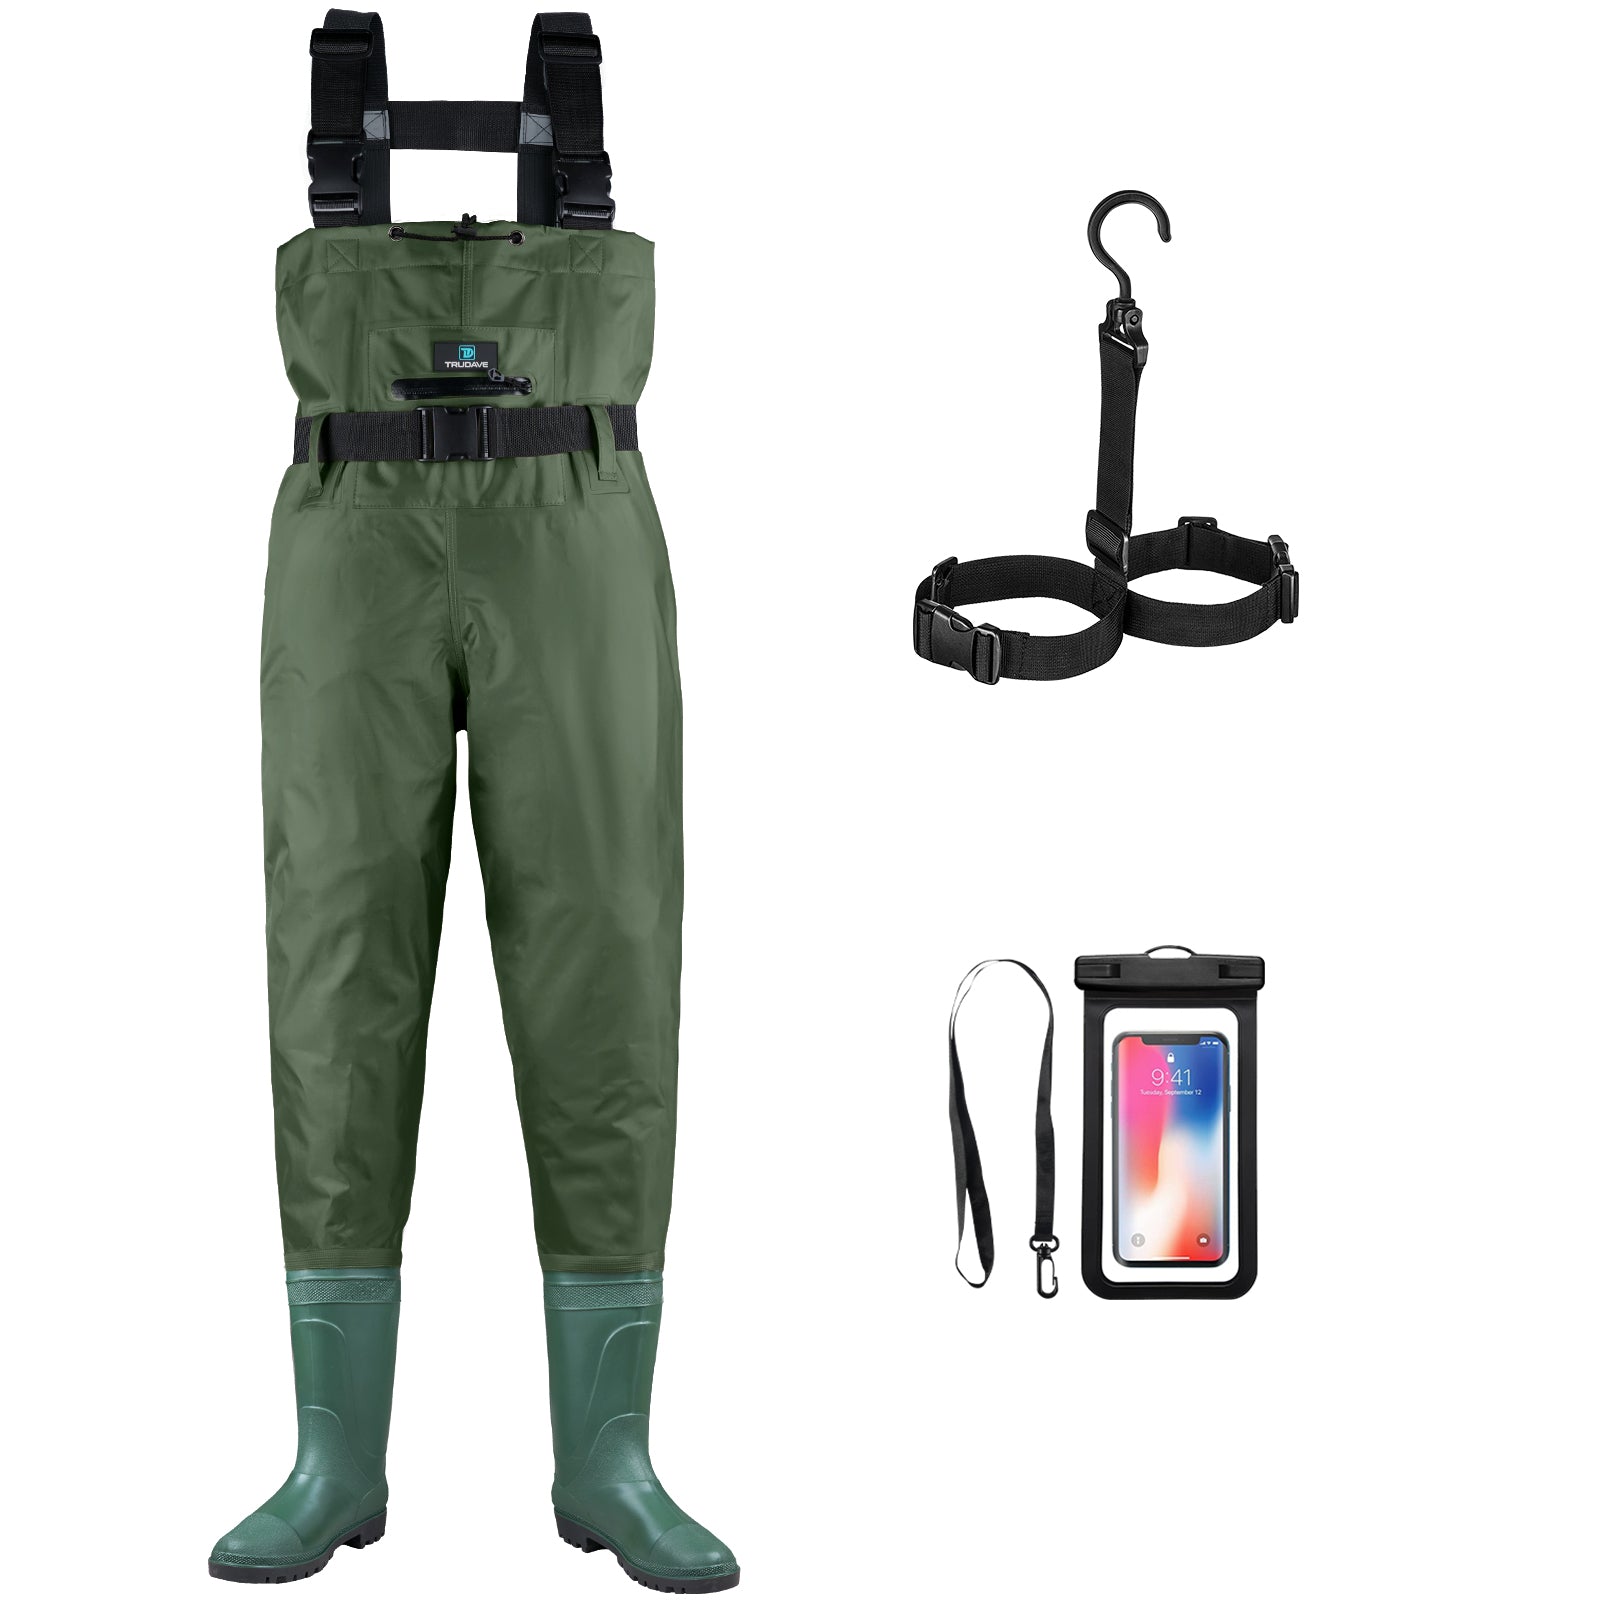 Trudave Stocking Foot Breathable Waders for Fly Fishing – TRUDAVE Gear